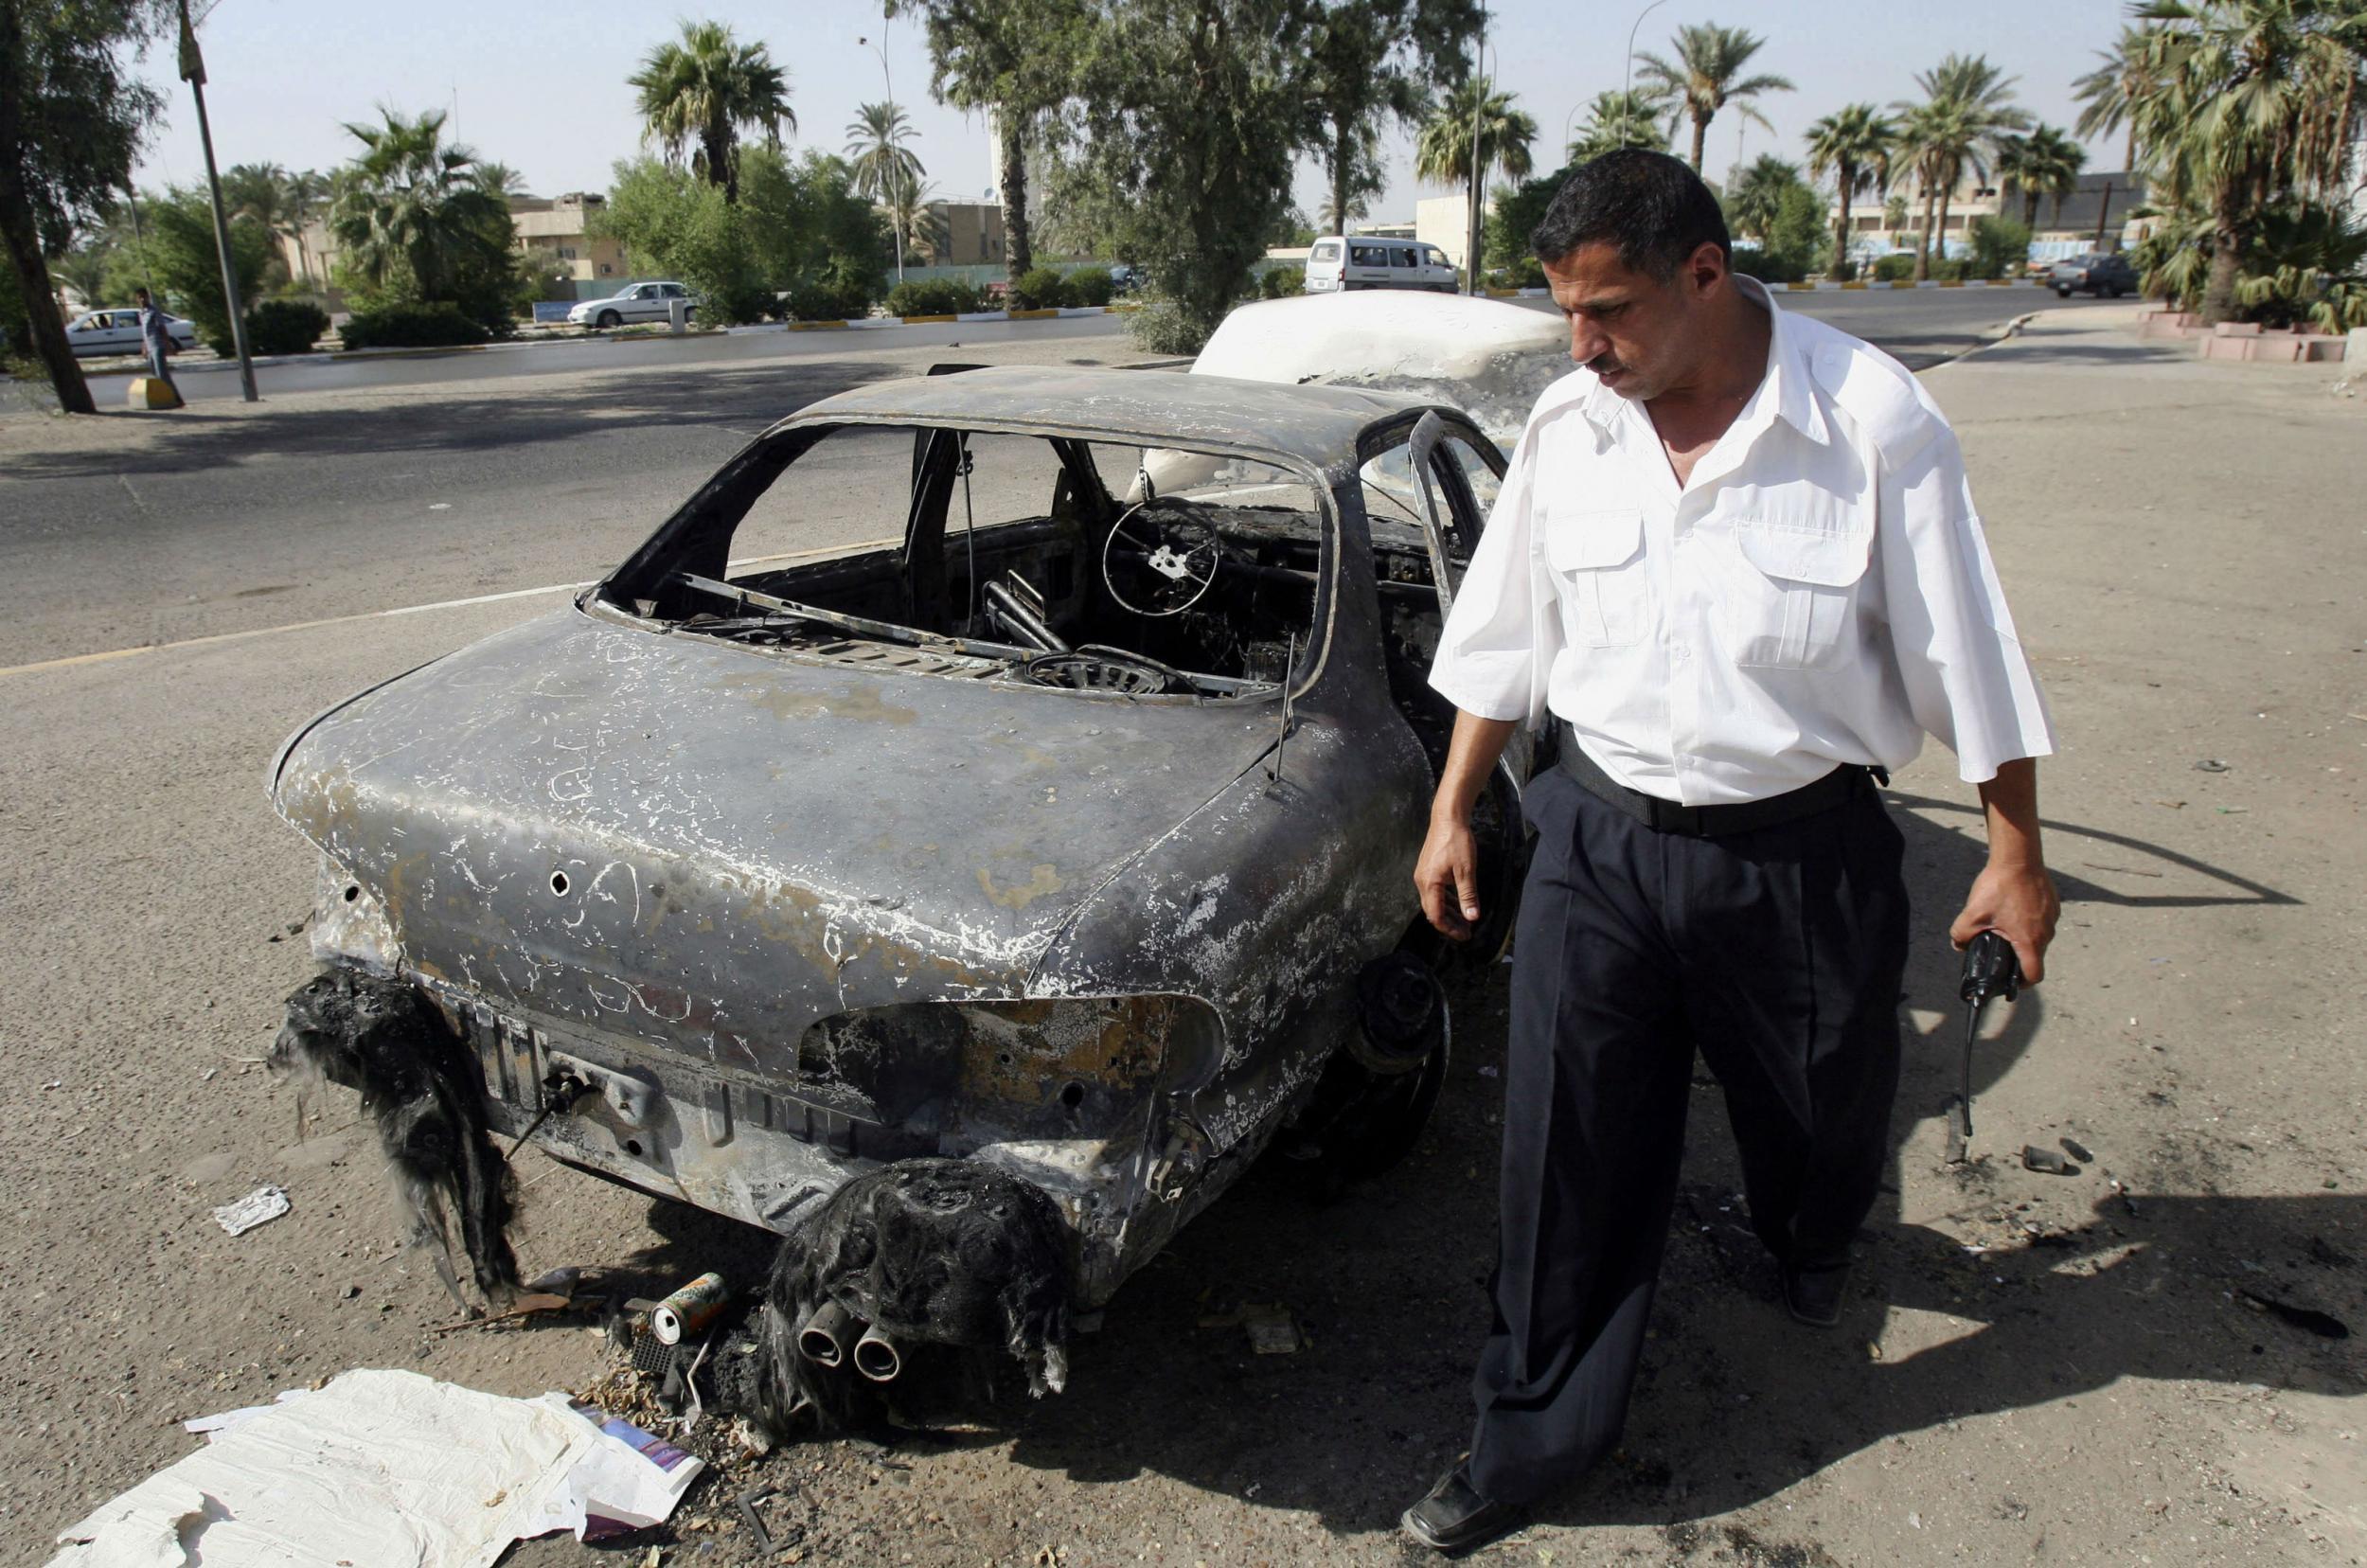 14 Iraqi civilians were killed in an incident in Baghdad involving Blackwater contractors in 2007